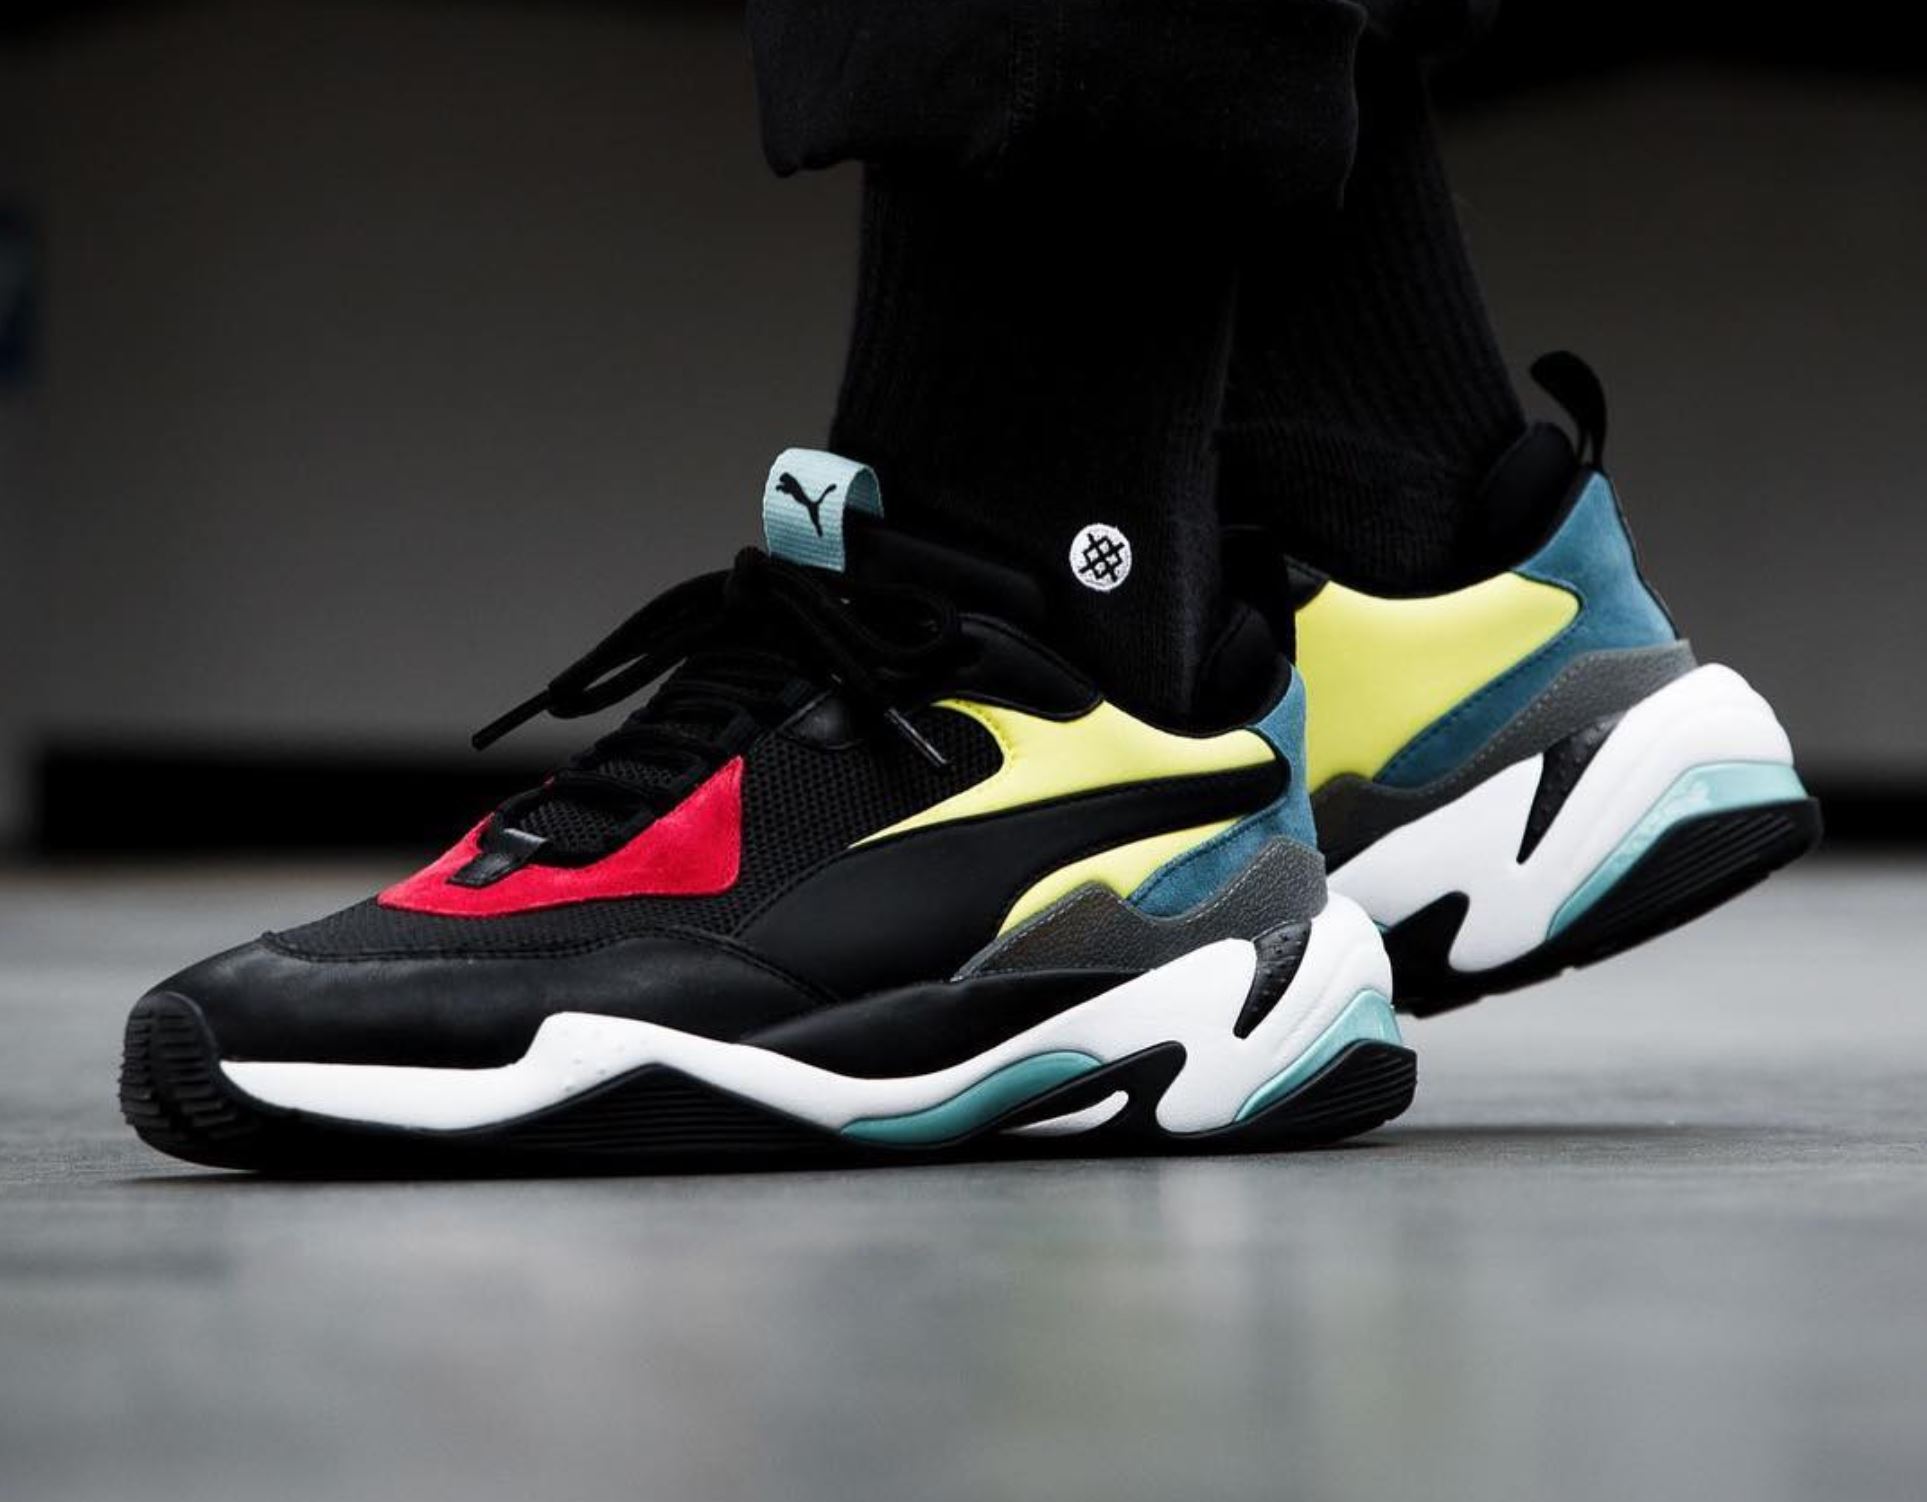 Leidinggevende films Vuilnisbak The Puma Thunder Spectra is Very On-Trend, and It's Coming in 2018 -  WearTesters